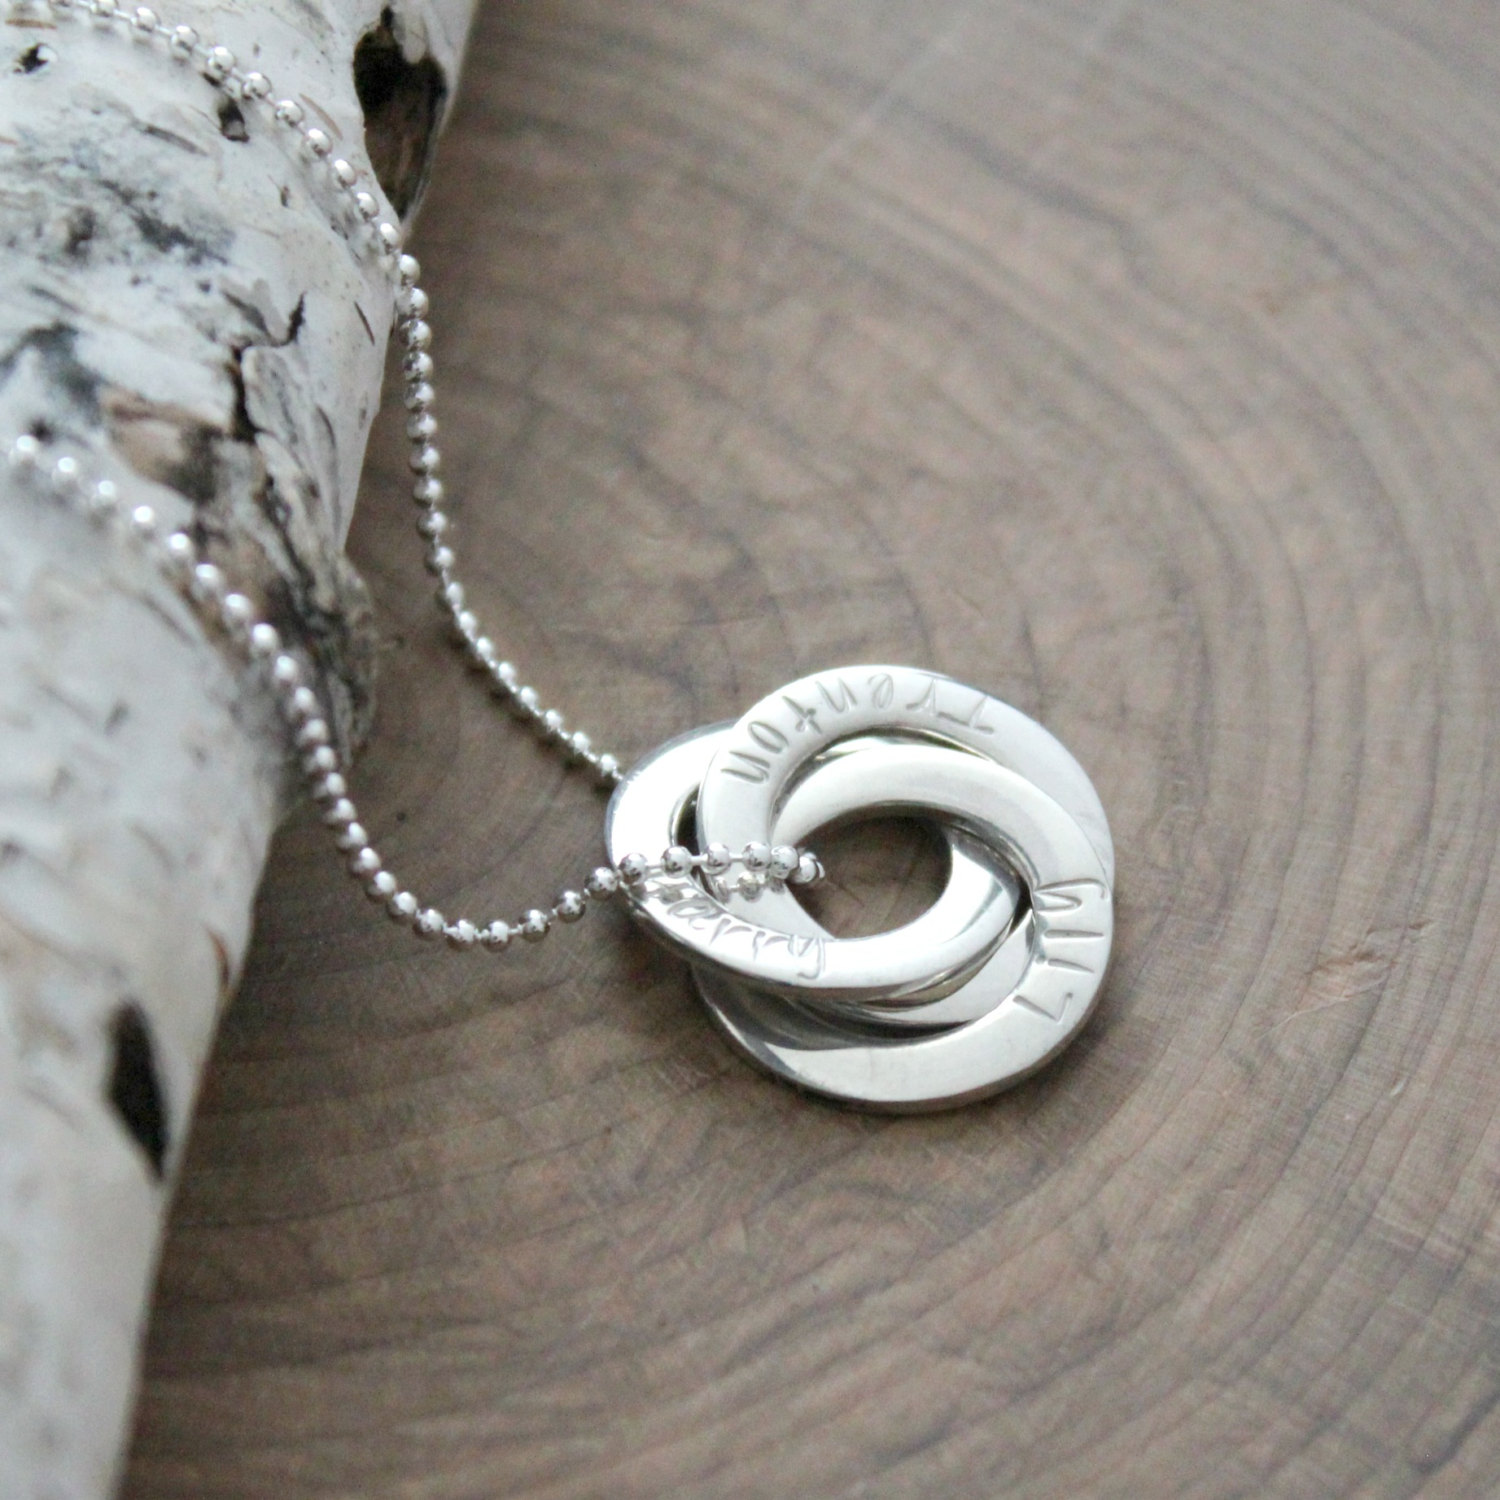 Personalized, Interlocking Ring Necklace, Russian Ring Pendant ...